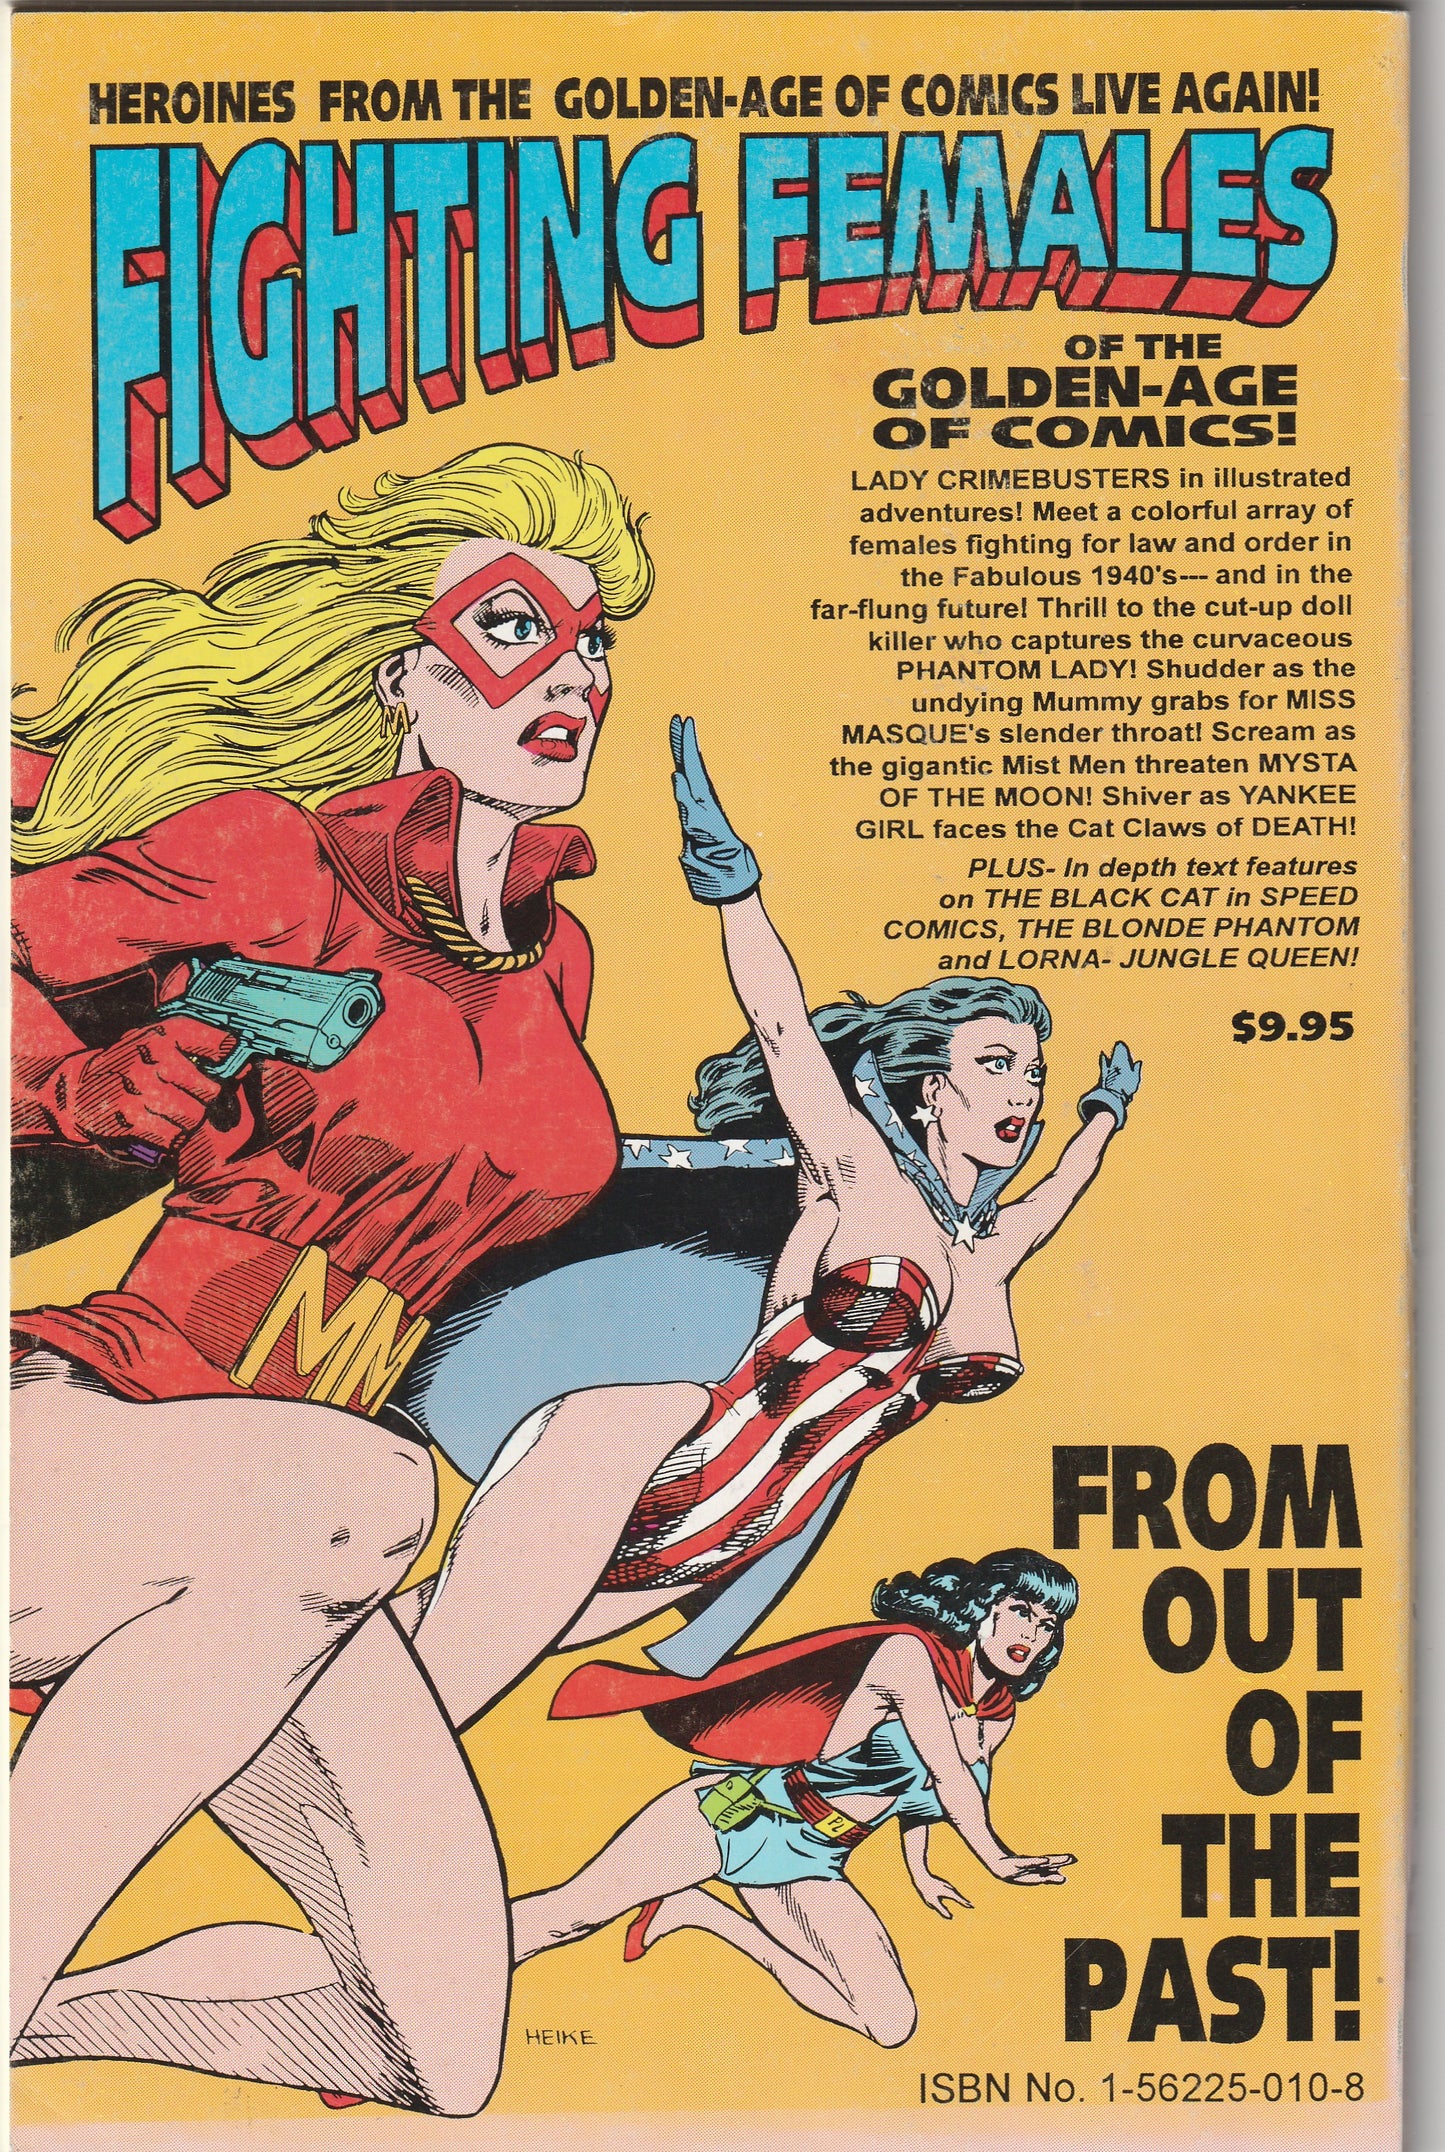 Golden-Age Greats Volume 6 - Fighting Females of the 1940s (1995)